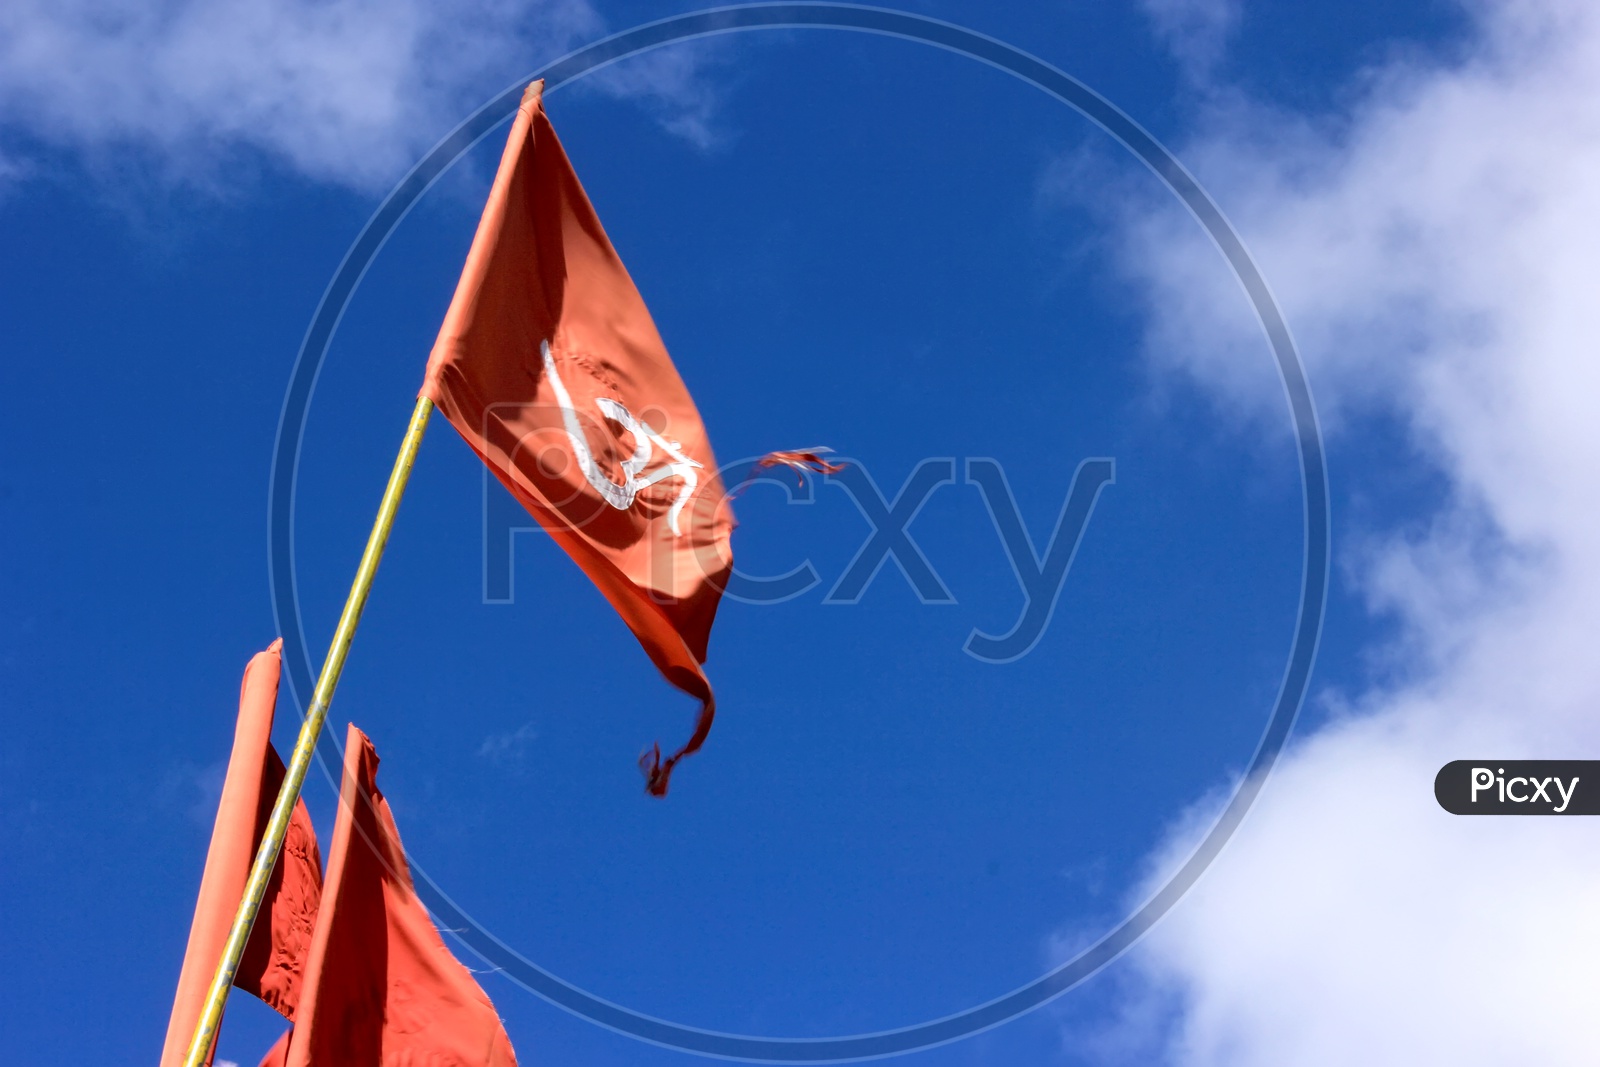 Red Flags with a blue sky background